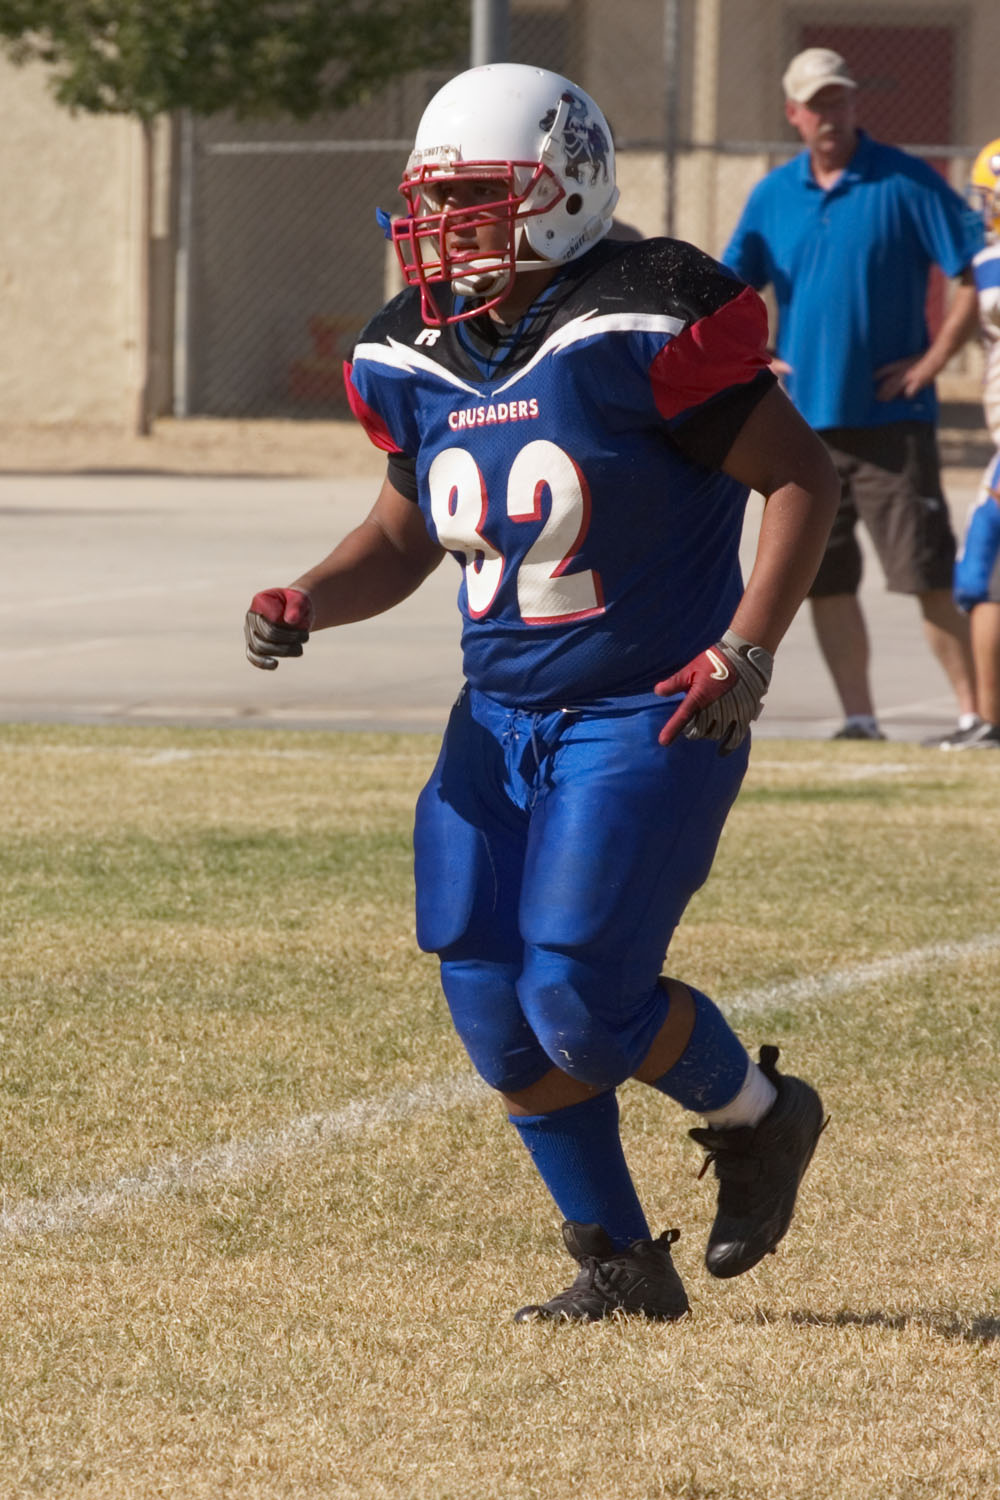 a player running and looking to the side during a football game